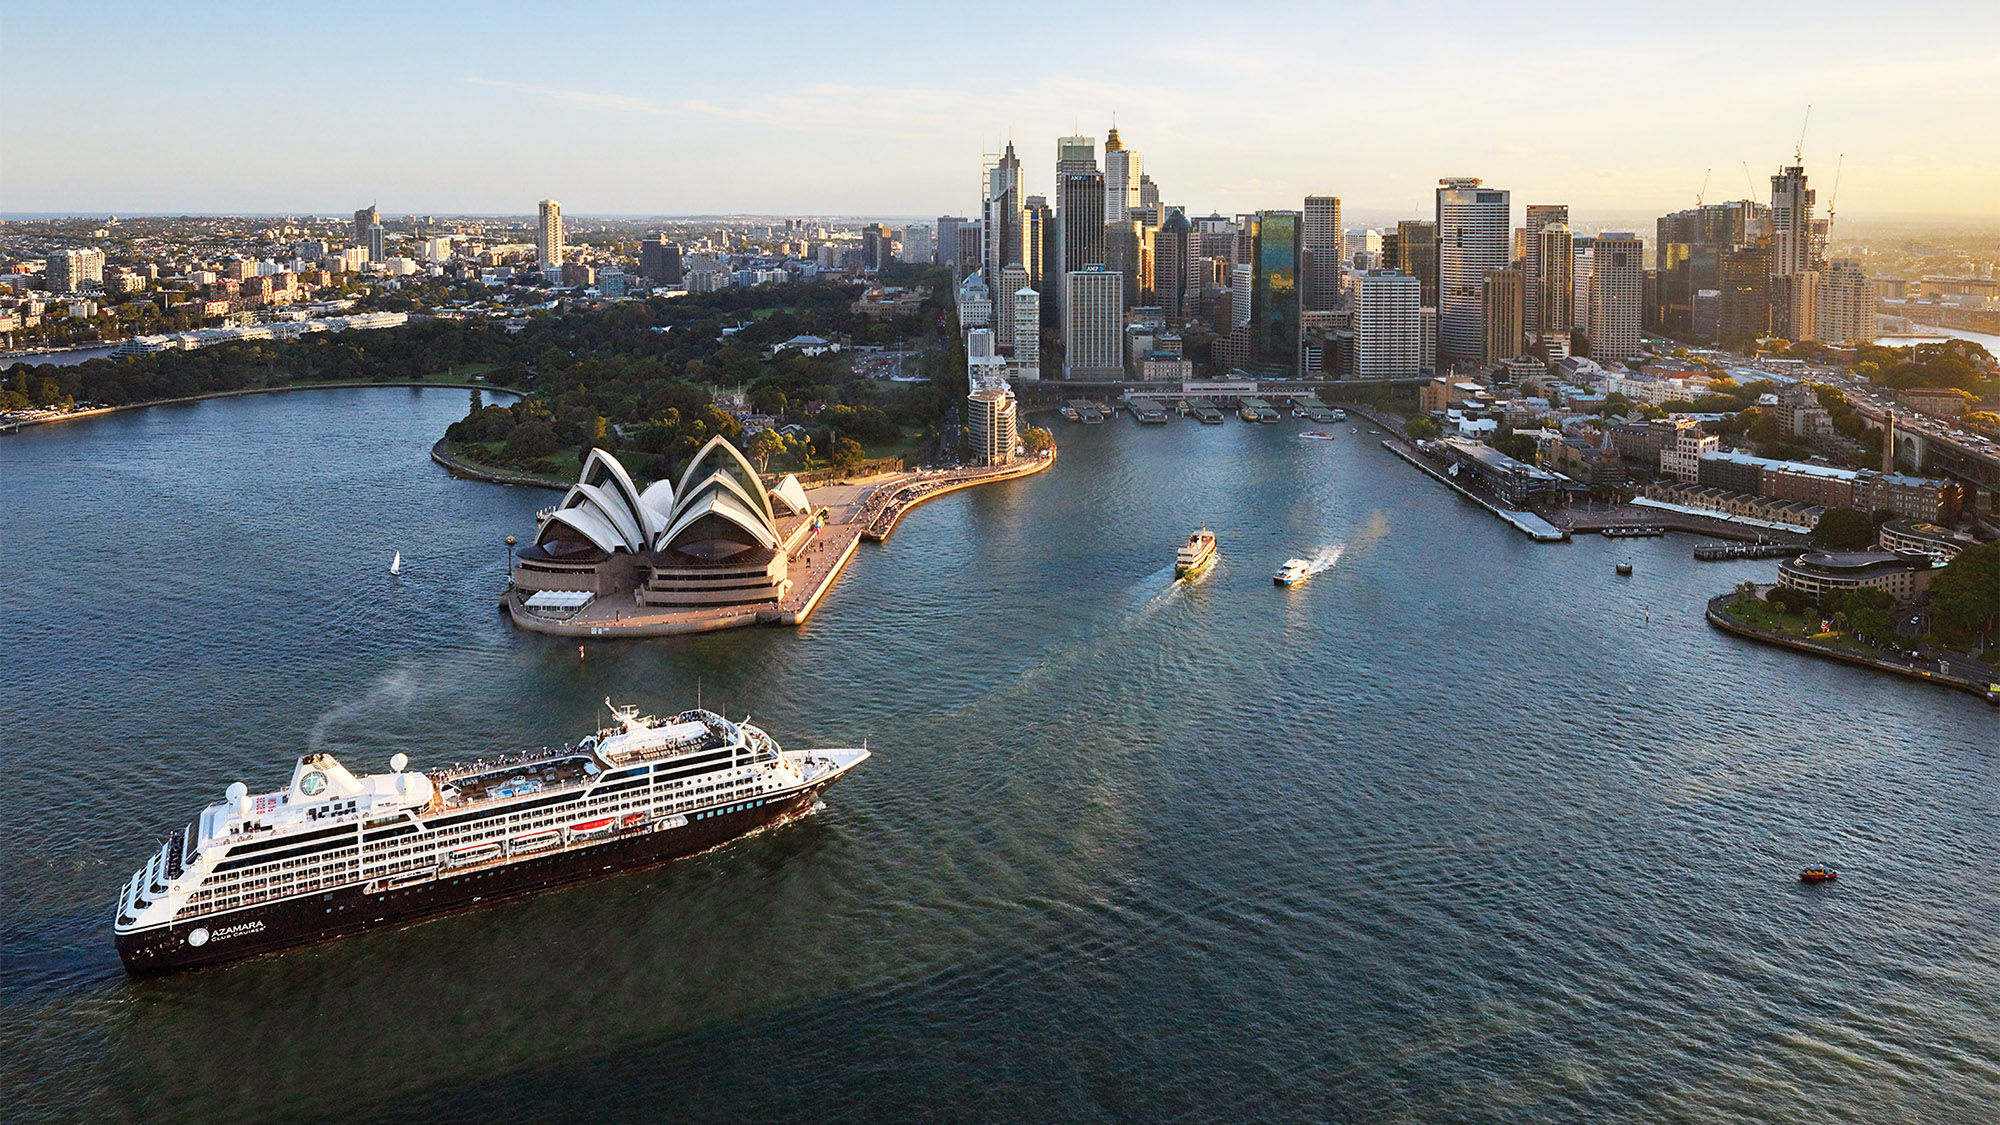 The Azamara Journey motors into Sydney Harbor. Perry Golf partners with Azamara on golf itineraries in the South Pacific.